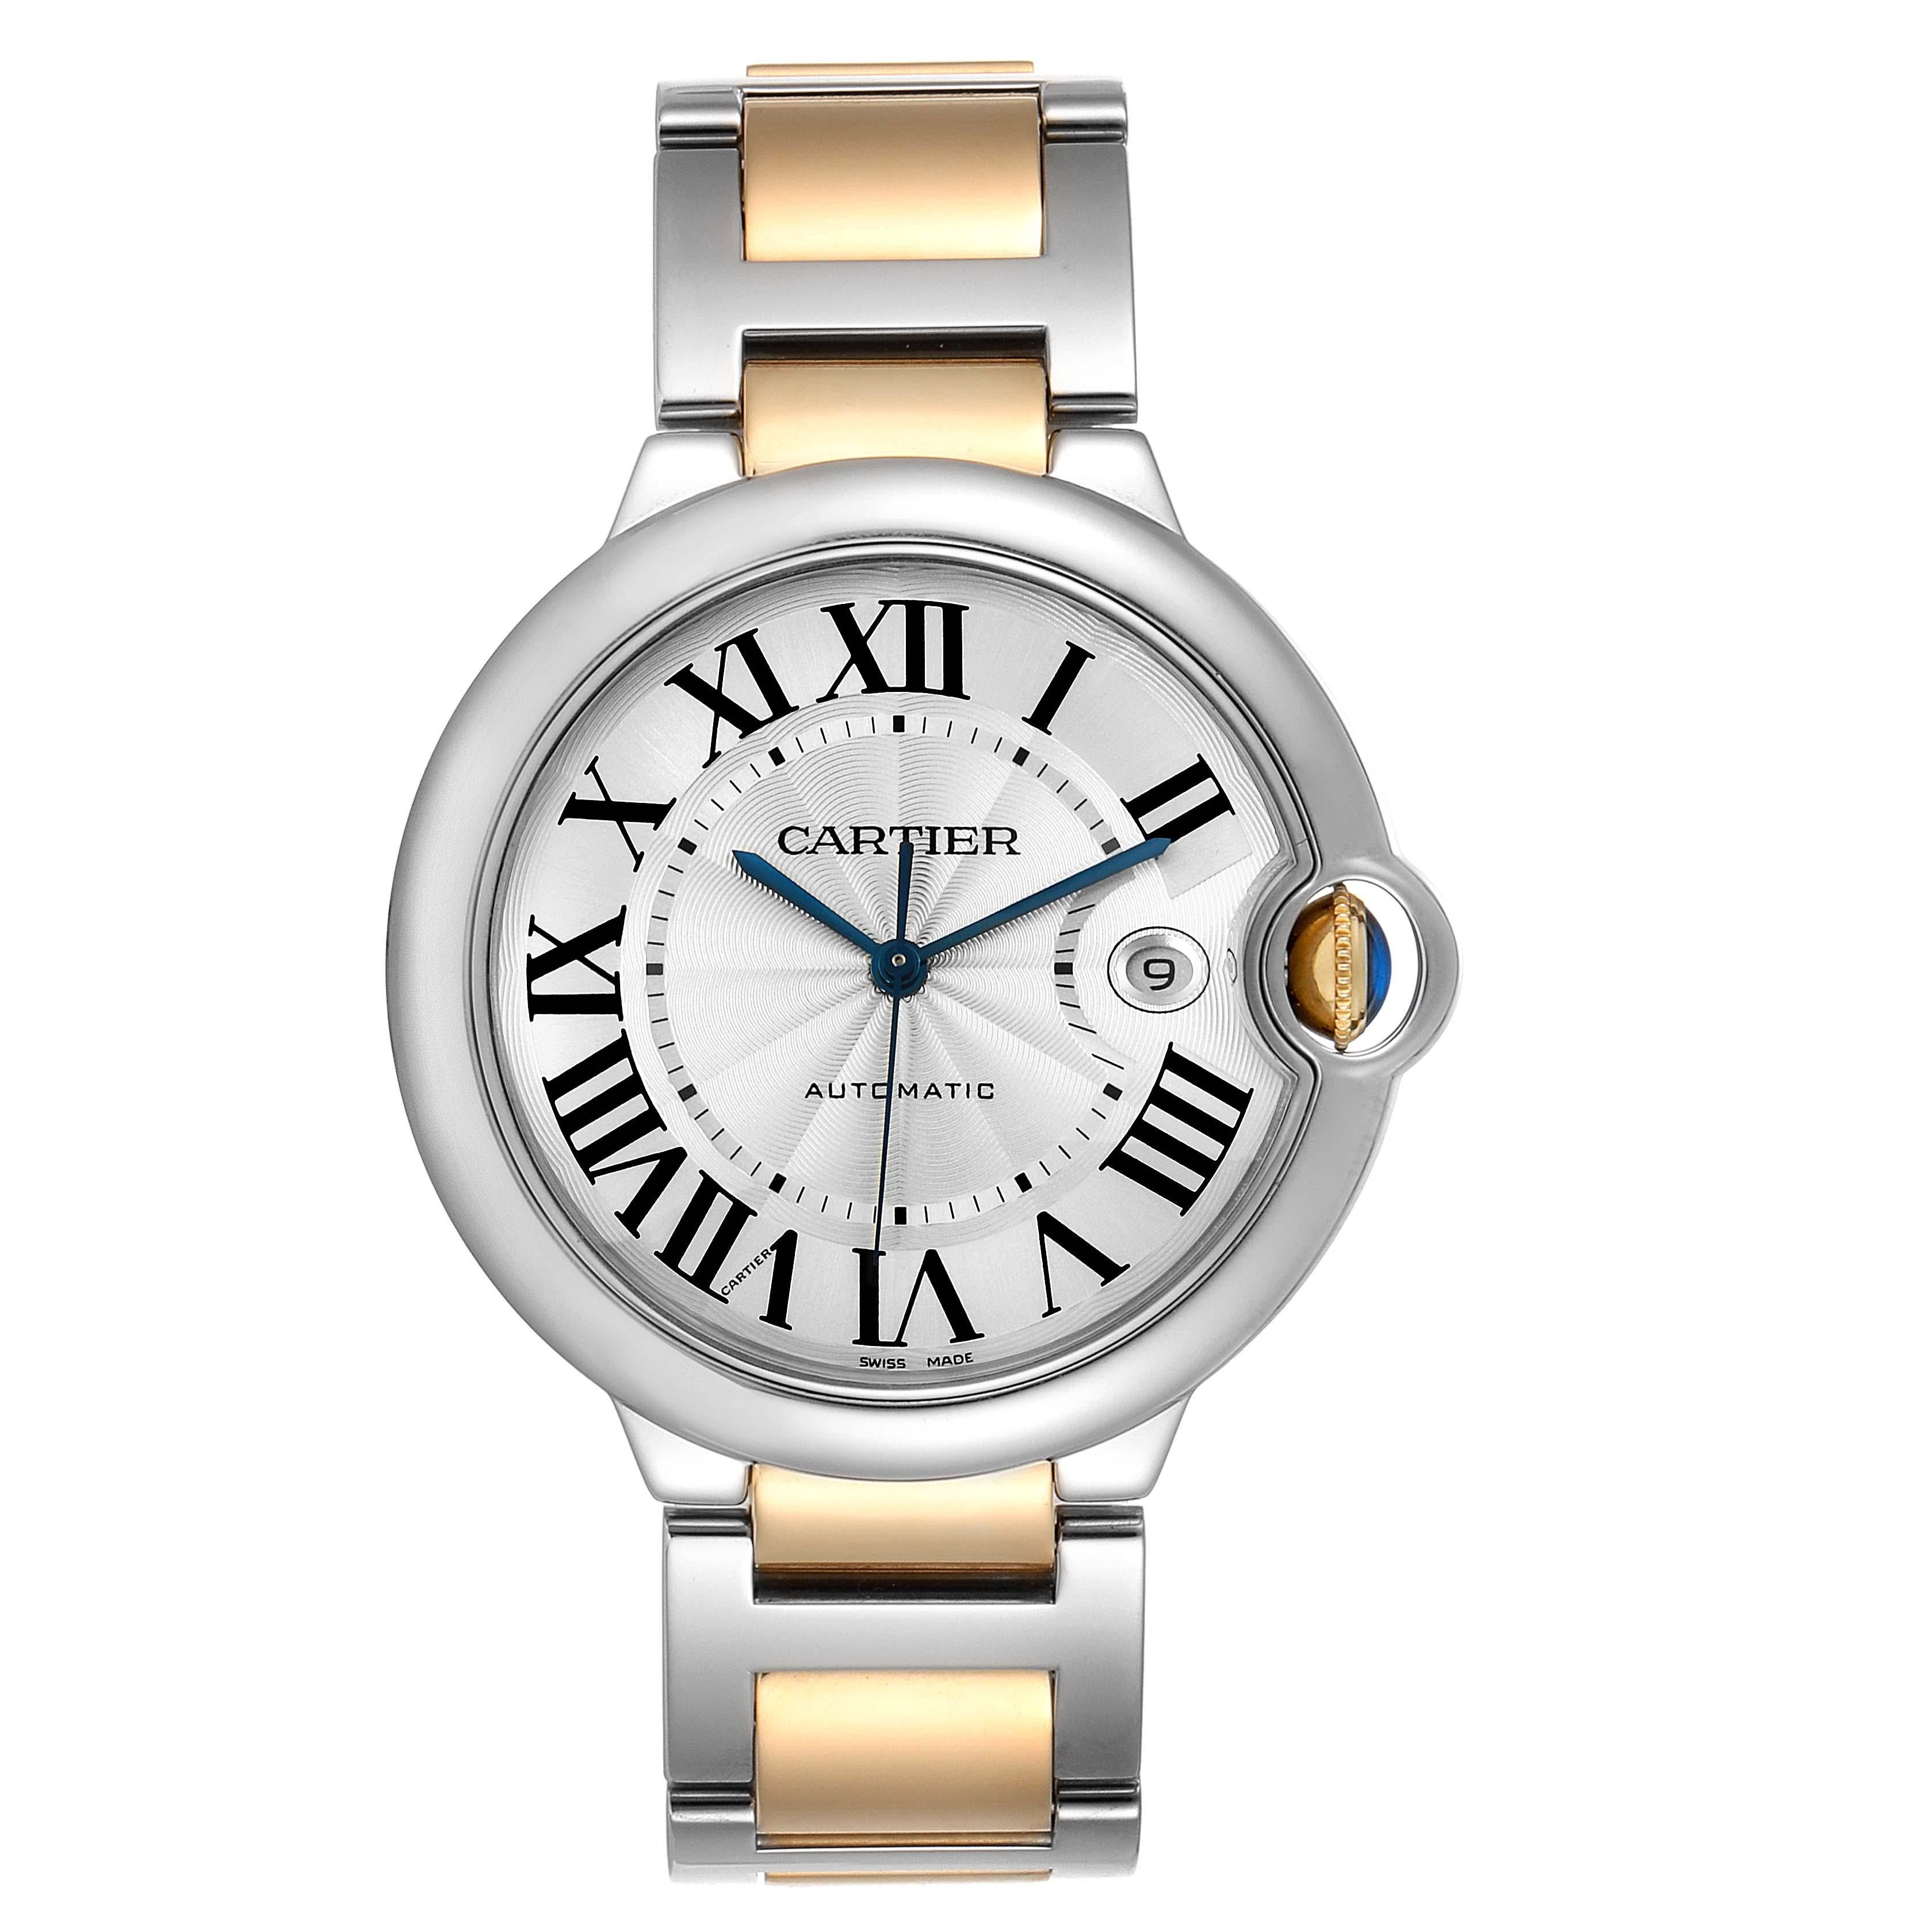 Cartier Ballon Bleu Silver Dial Steel Yellow Gold Mens Watch W69009Z3. Automatic self-winding movement. Caliber 049. Round stainless steel case 42.1 mm in diameter, 13 mm thick. Fluted 18k crown set with the blue spinel cabochon. Stainless steel